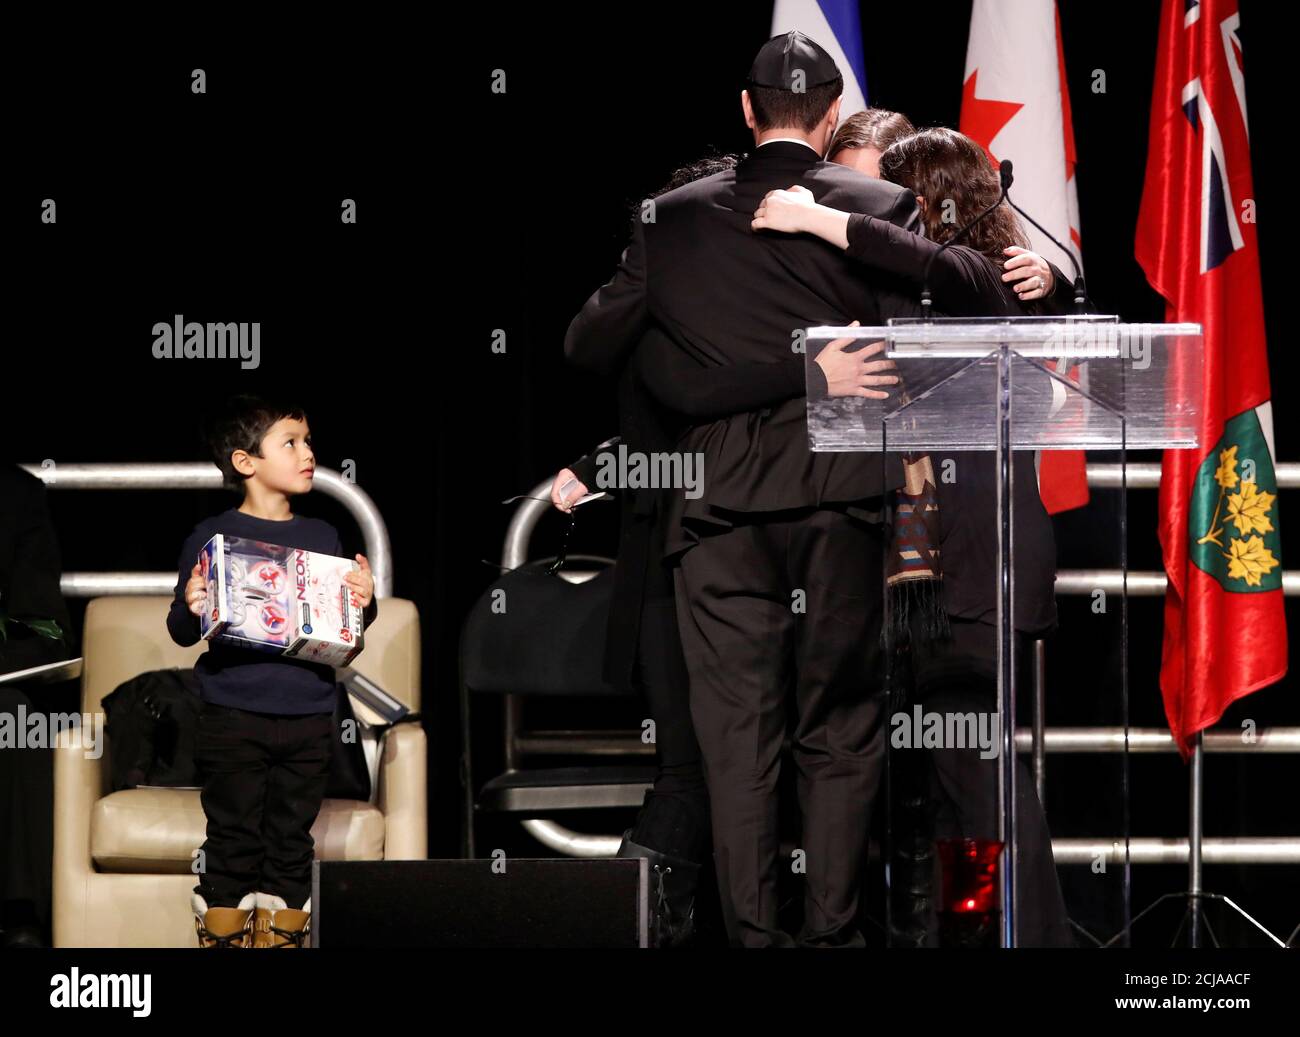 The children of Apotex pharmaceutical billionaire Barry Sherman and his  wife Honey console each other during their memorial, days after what police  called their suspicious deaths in Toronto, Ontario, Canada December 21,